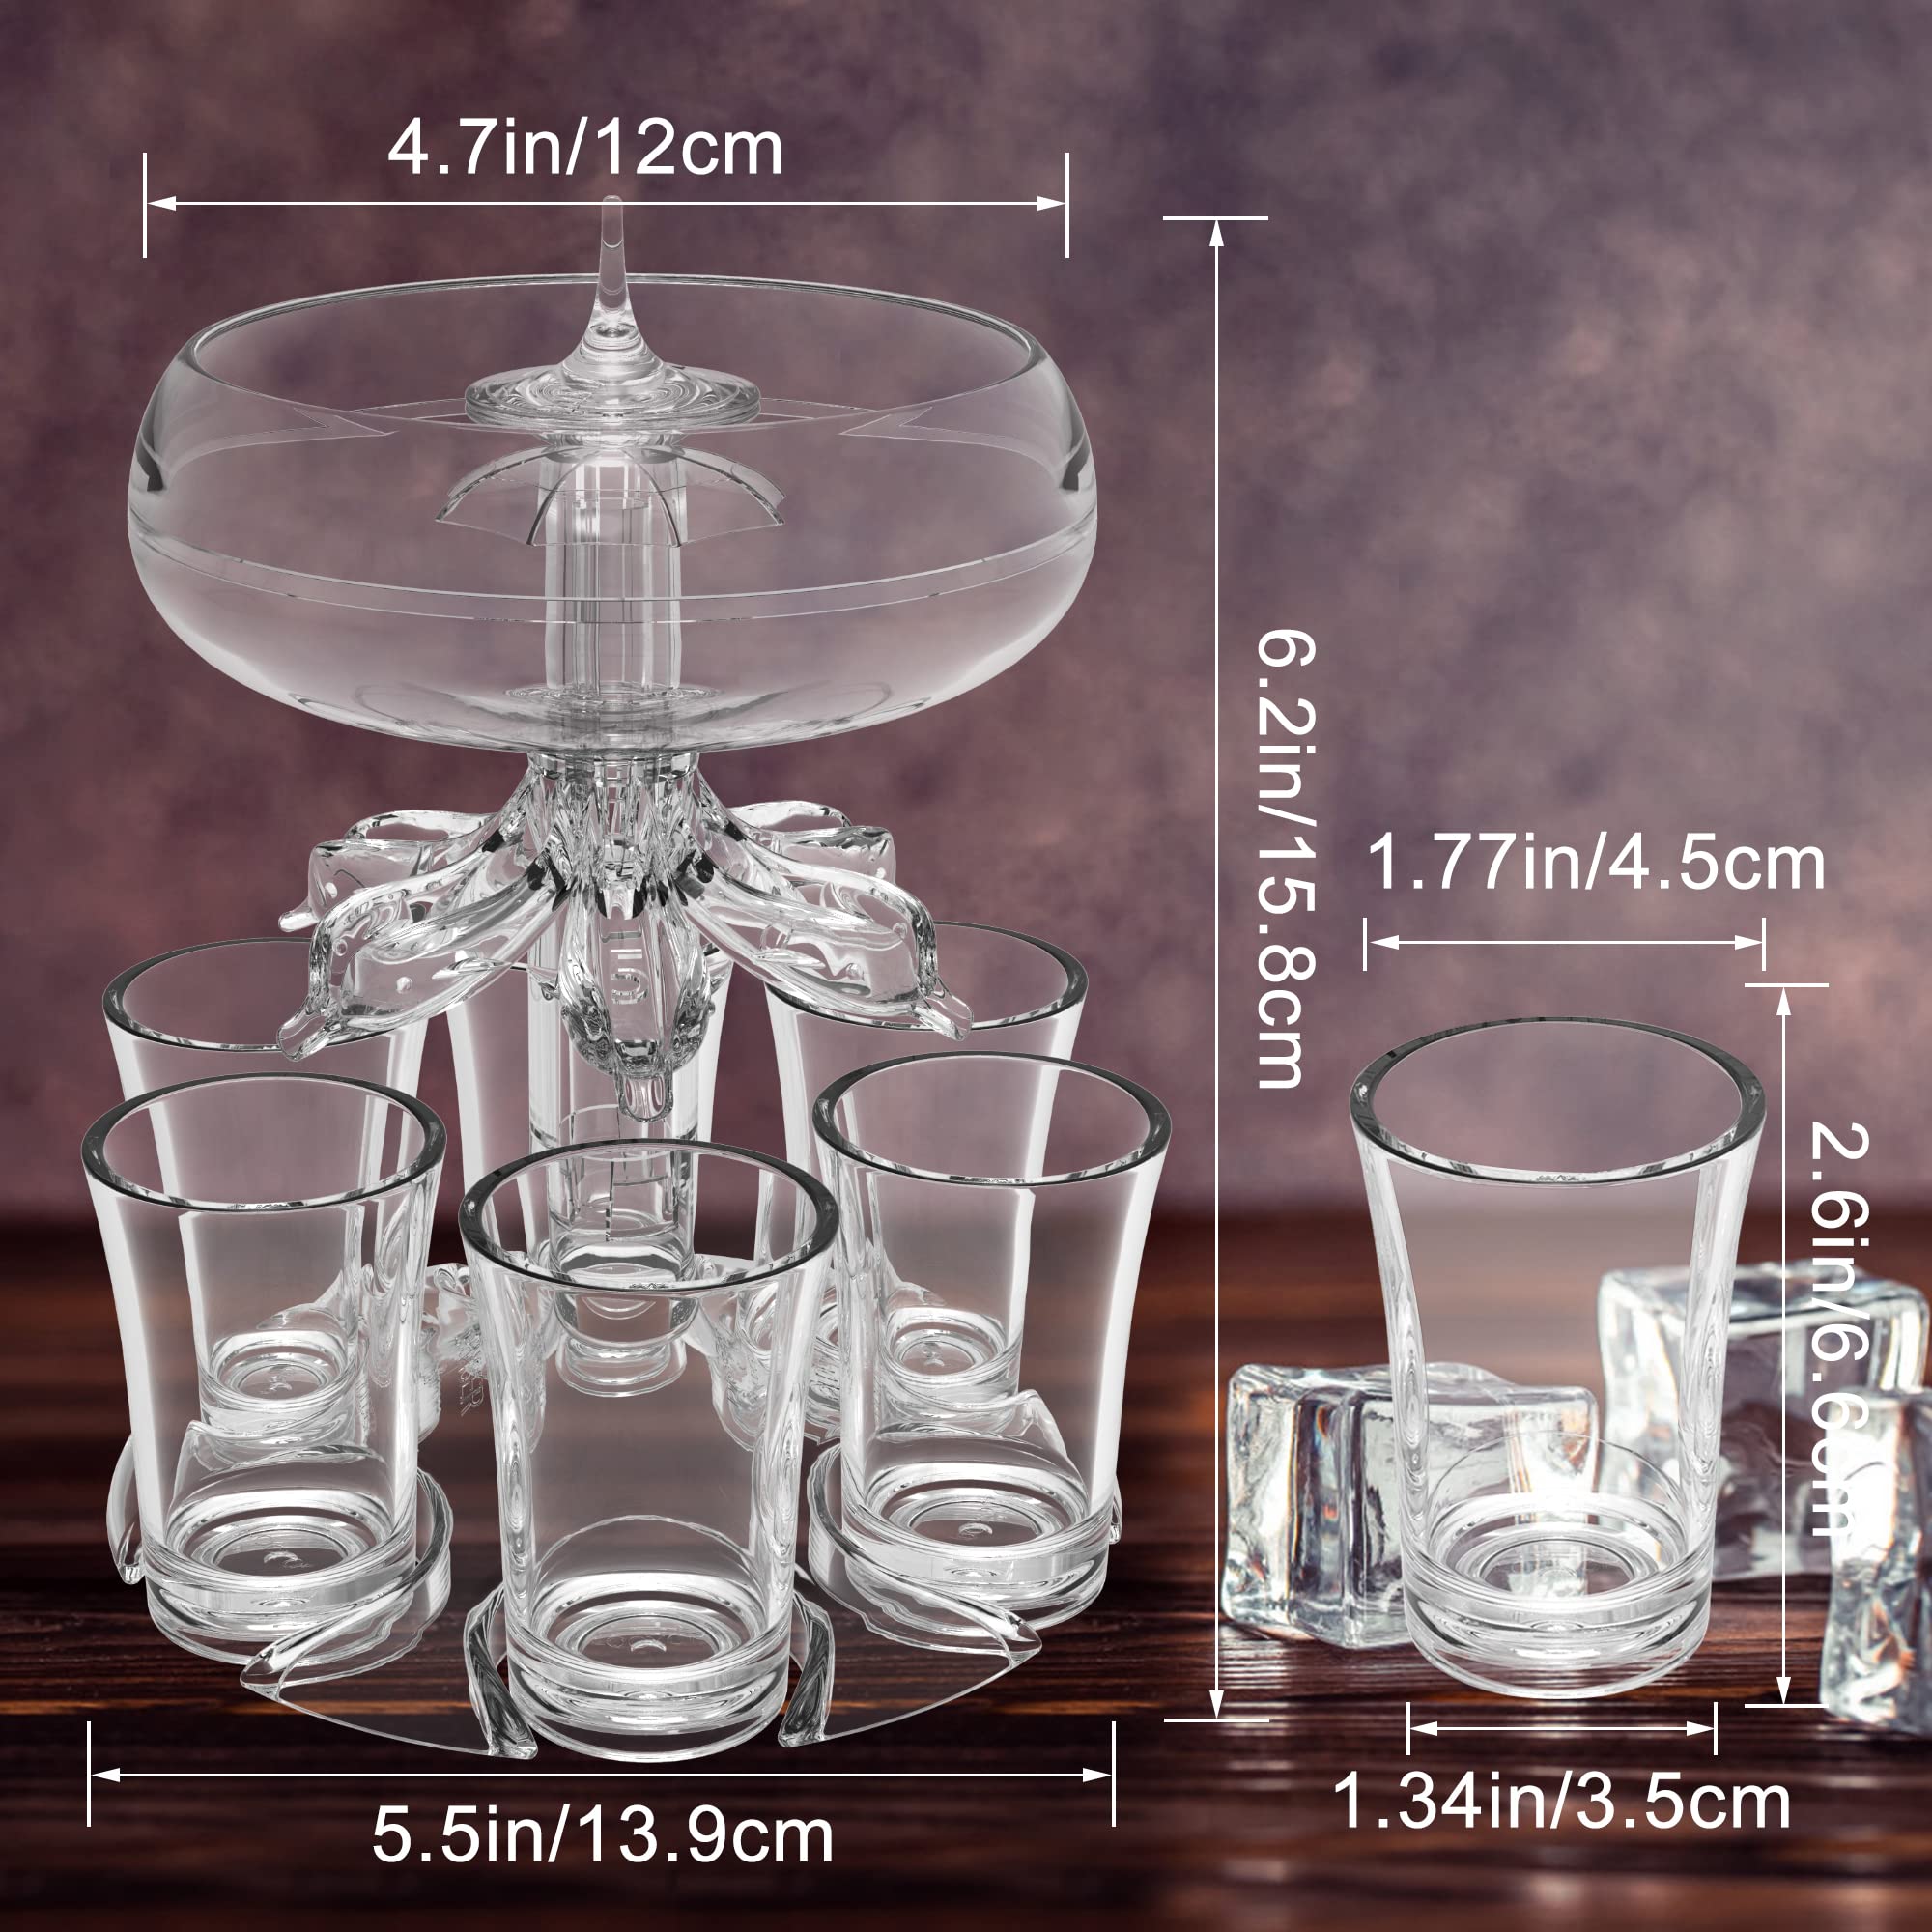 MOKOQI Shot Glasses Party Drink Dispenser with 6 Shot Glasses Set Liquid Beverage Drink Fountains for Parties on Birthday Wedding Holiday Fun Restaurants Accessories Home Gifts